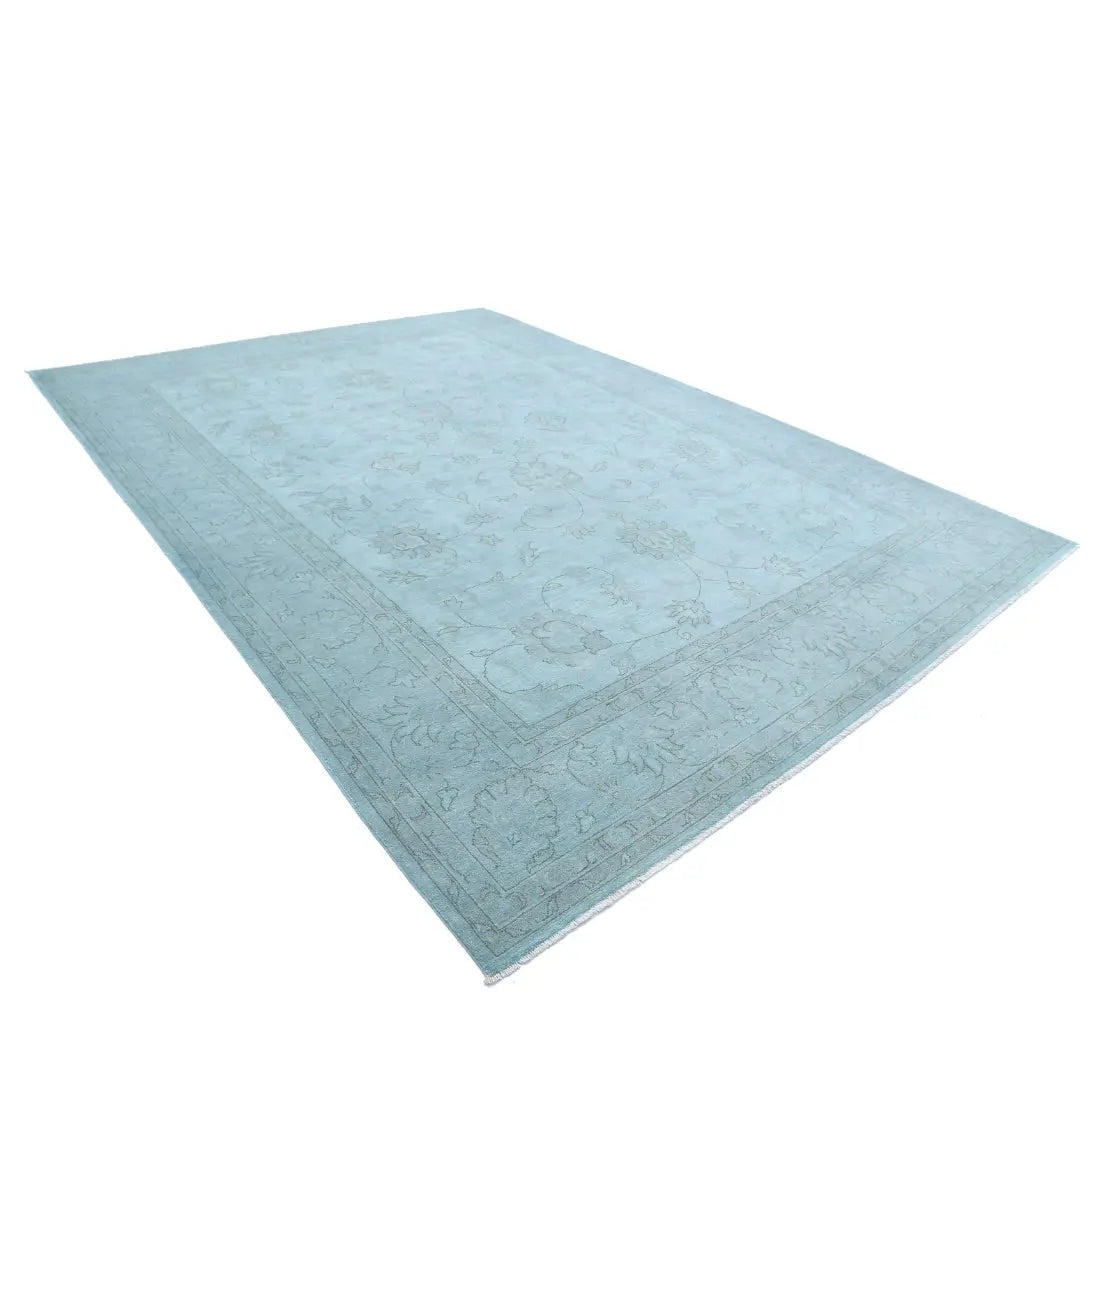 Hand Knotted Overdye Wool Rug - 9'11'' x 13'10''